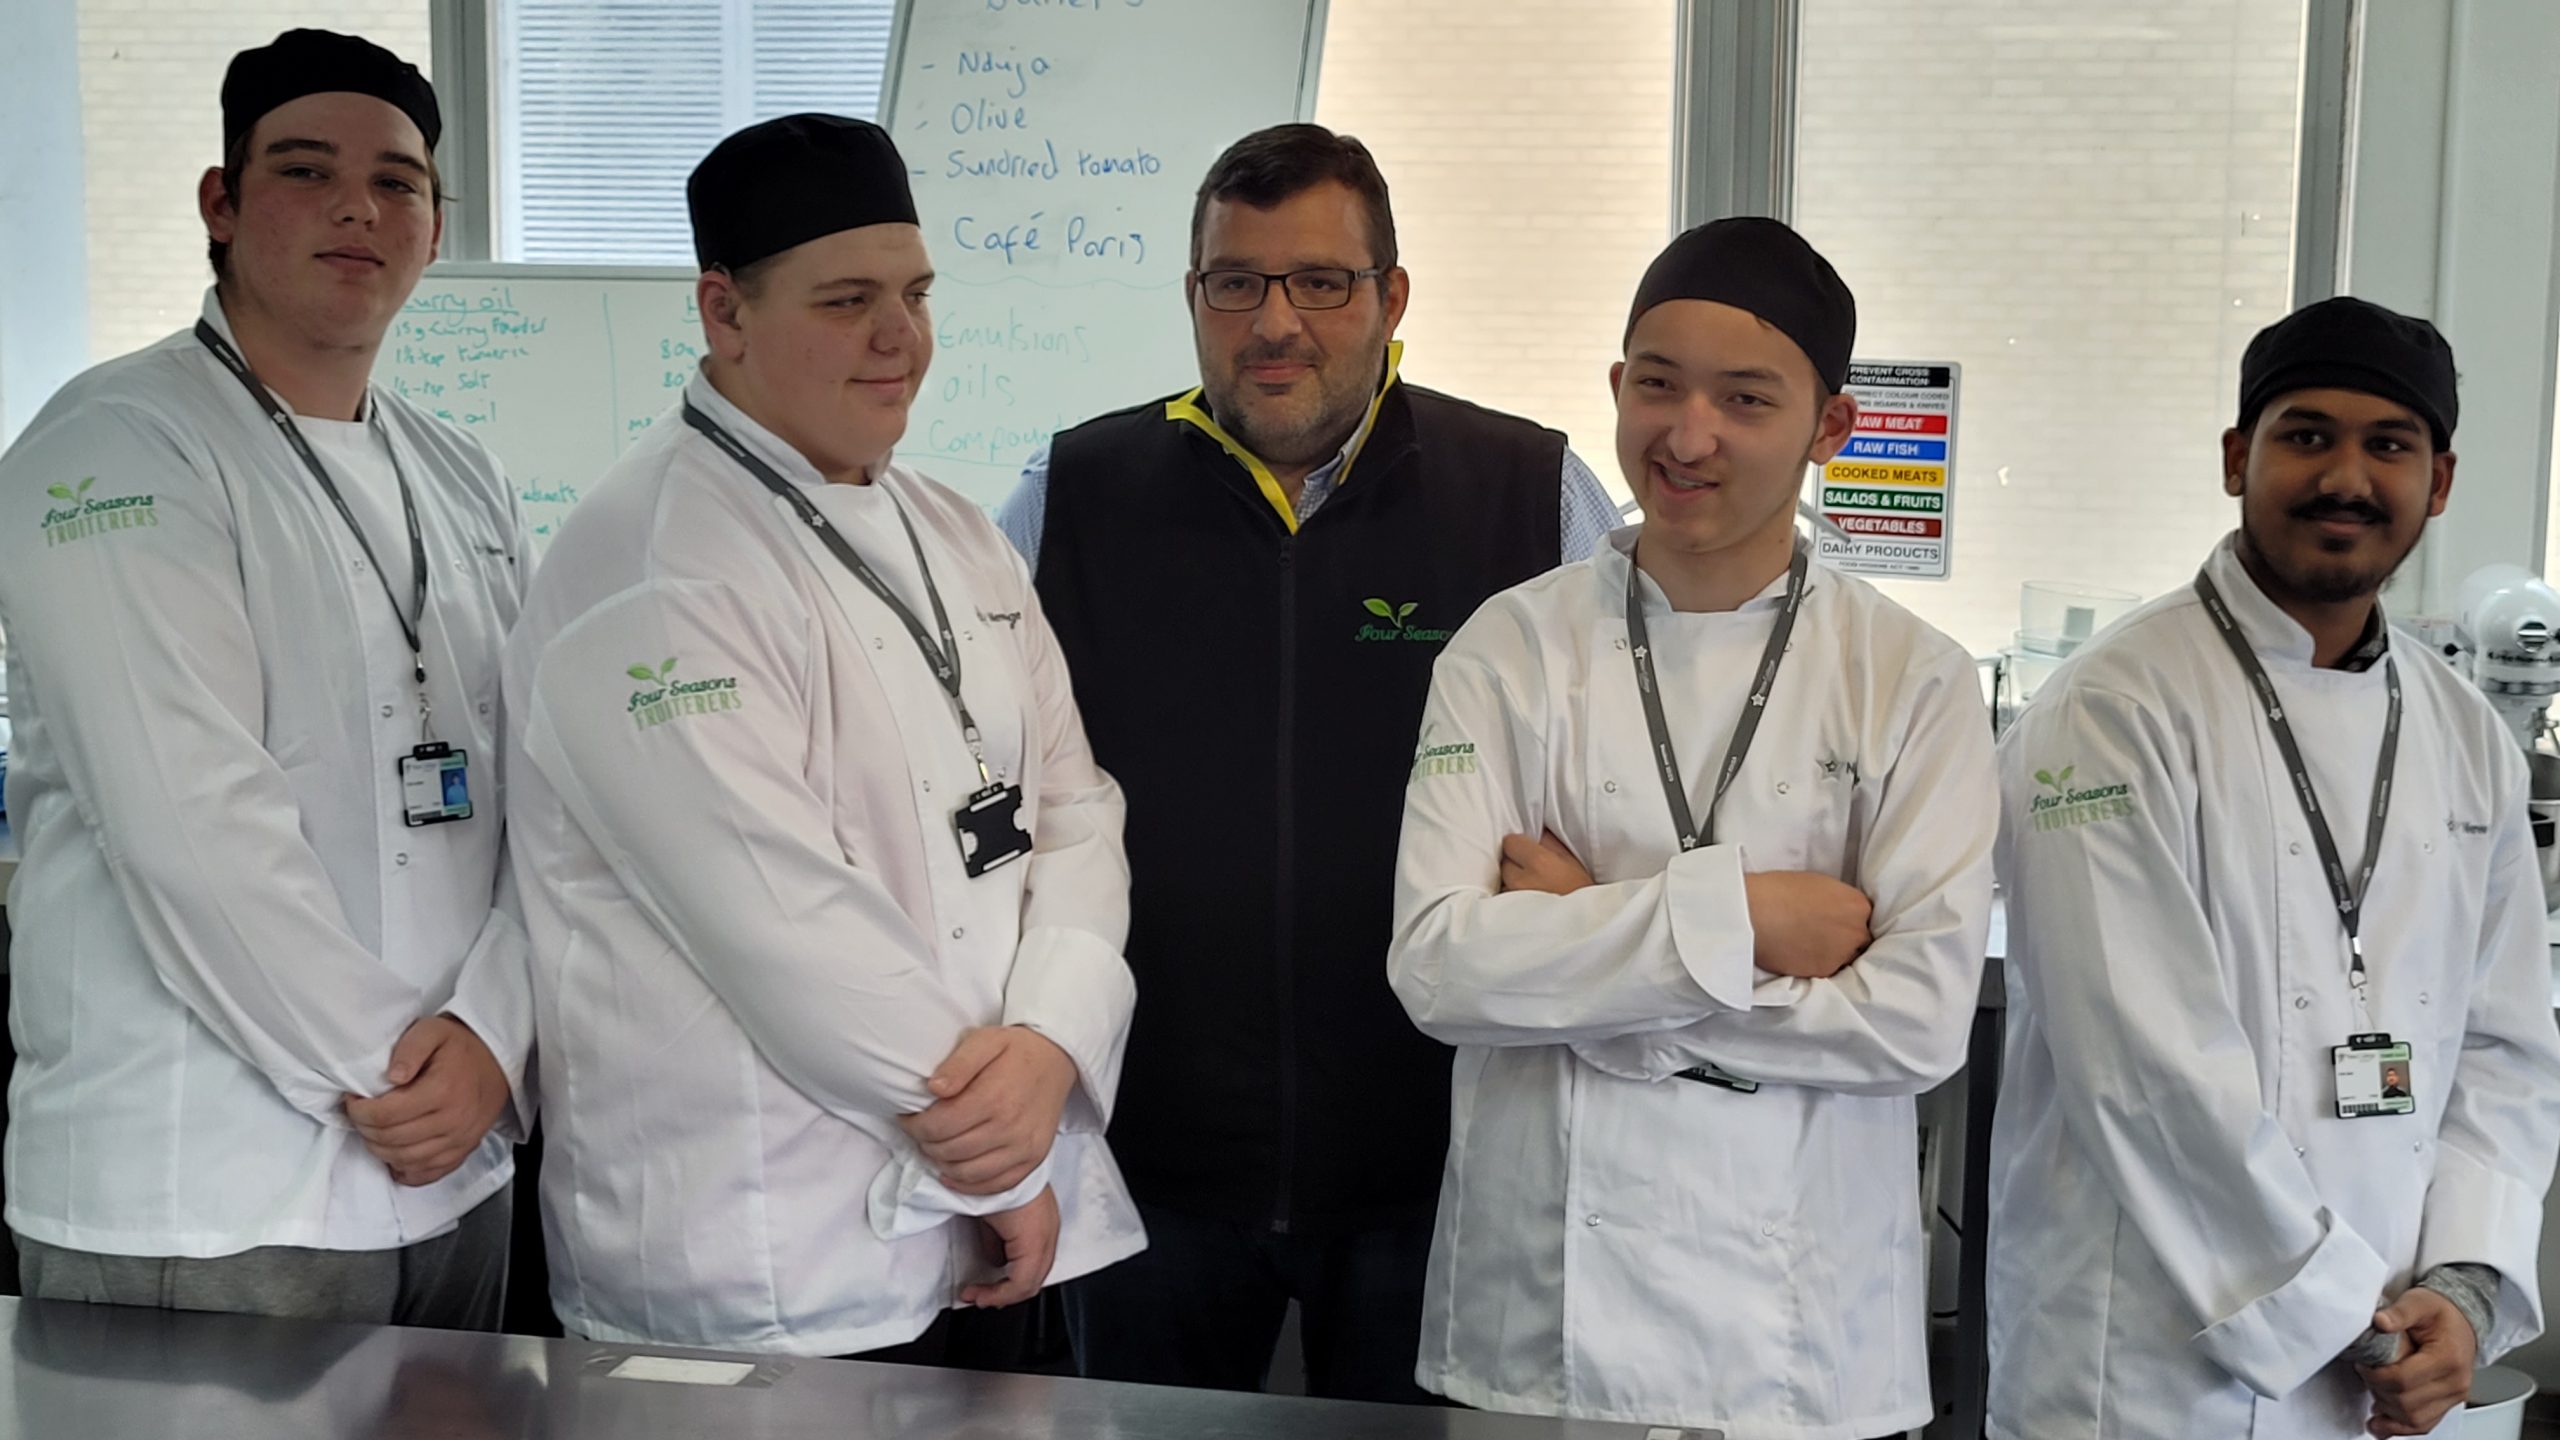 Inspiring the next generation of chefs